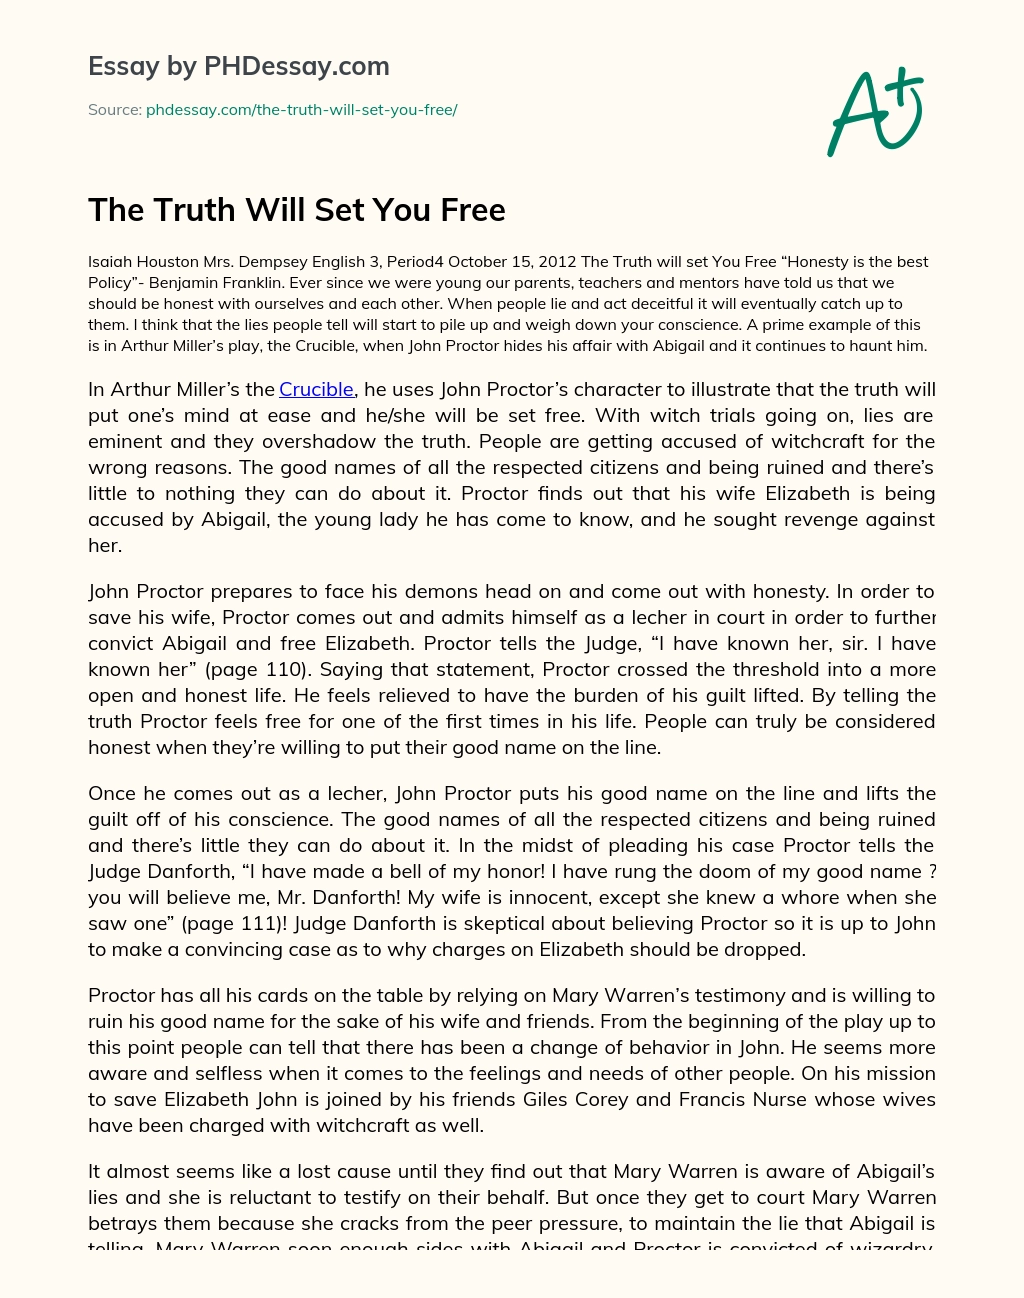 essay about the truth will set you free